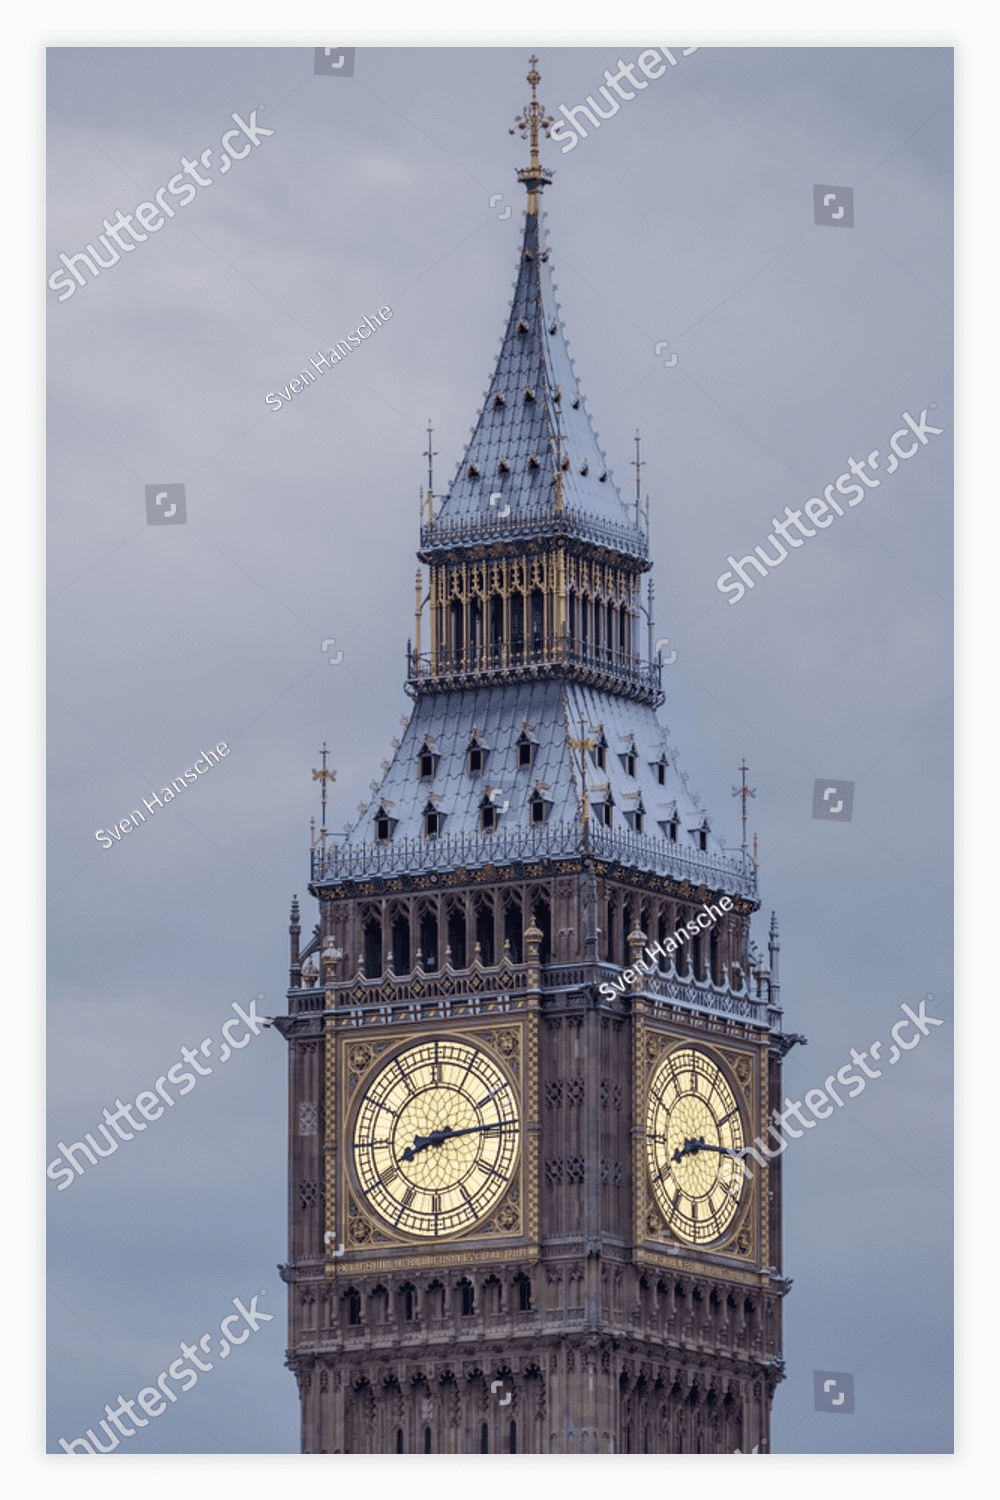 The big ben clock tower towering over the city of london.